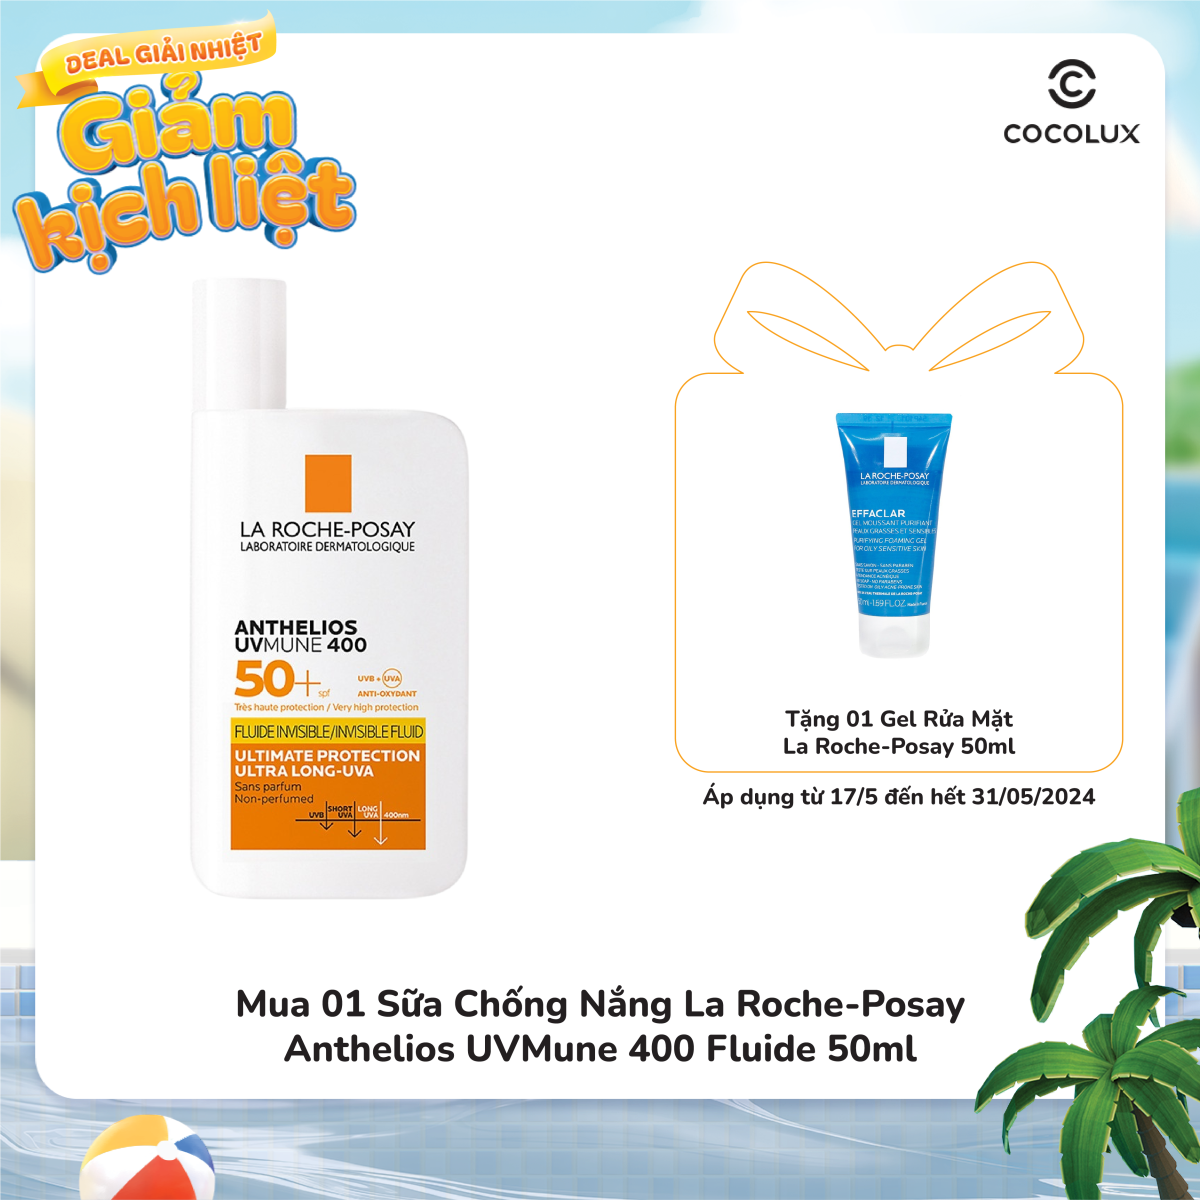 Sữa Chống Nắng La Roche-Posay Anthelios UVMune 400 Fluide Invisible SPF50+ 50ml